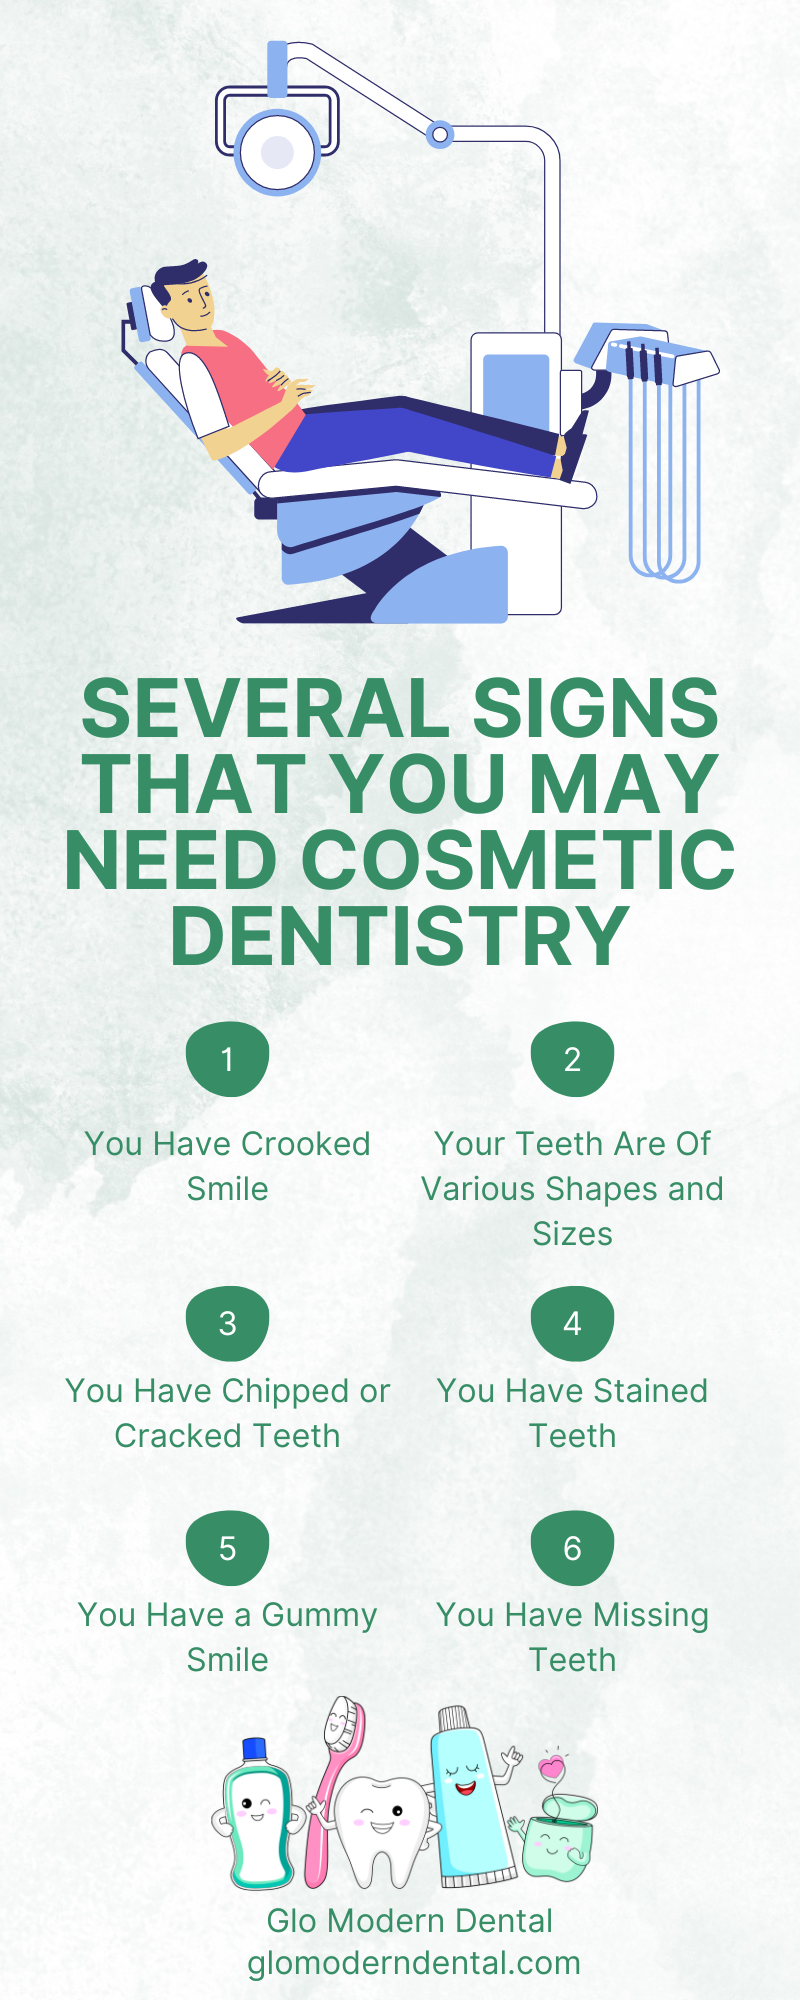 Several Signs That You May Need Cosmetic Dentistry Infographic